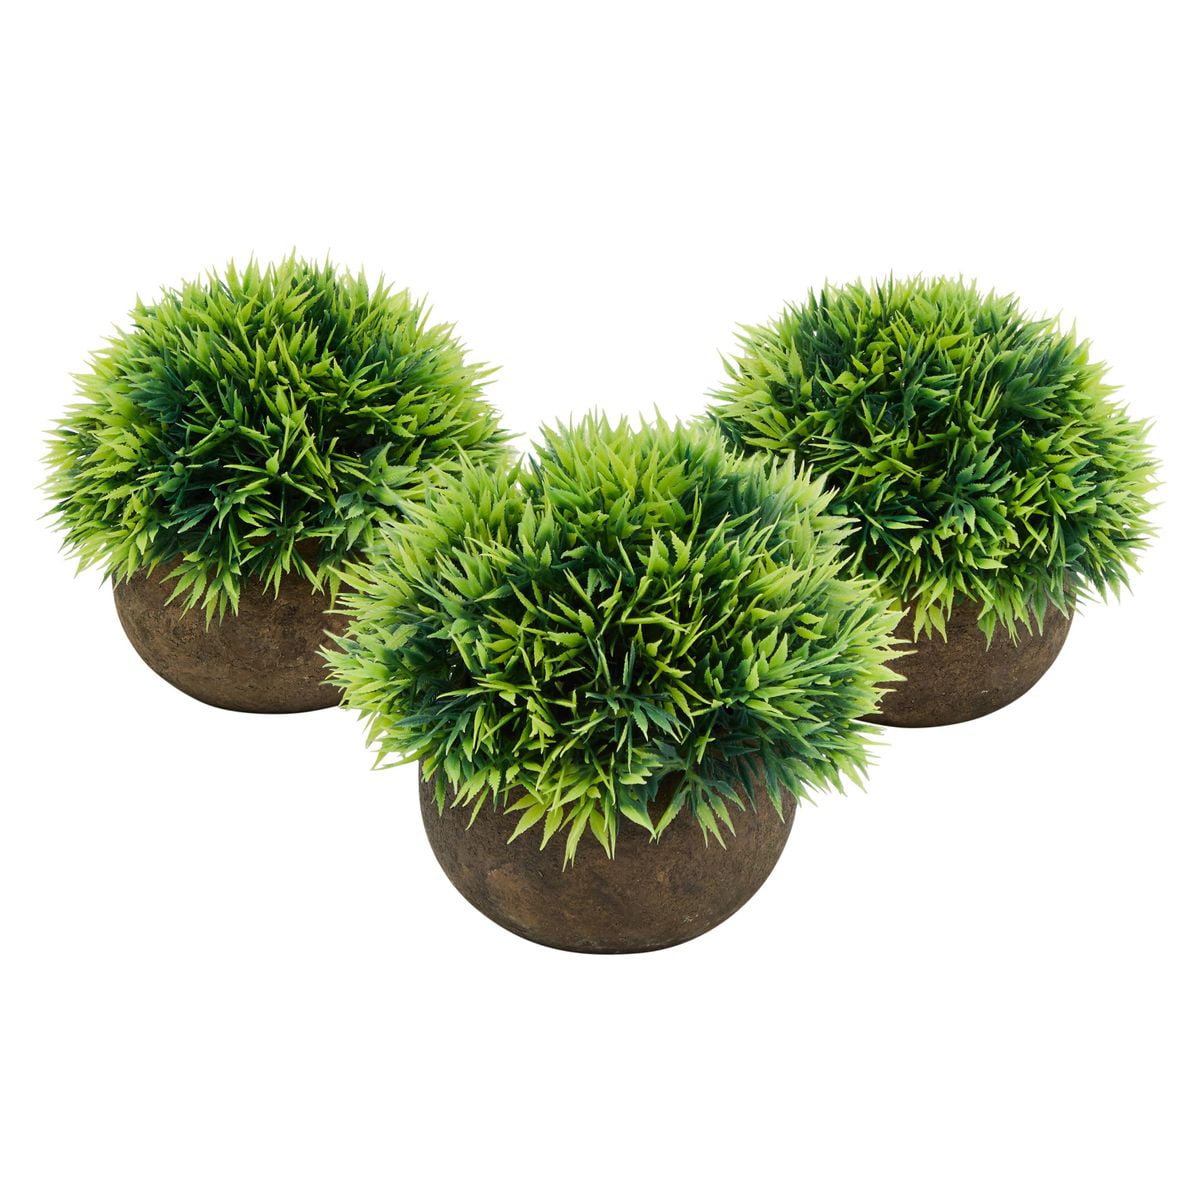 Juvale Small Artificial Potted Fake House Plant Home Decoration 3 Piece Set 